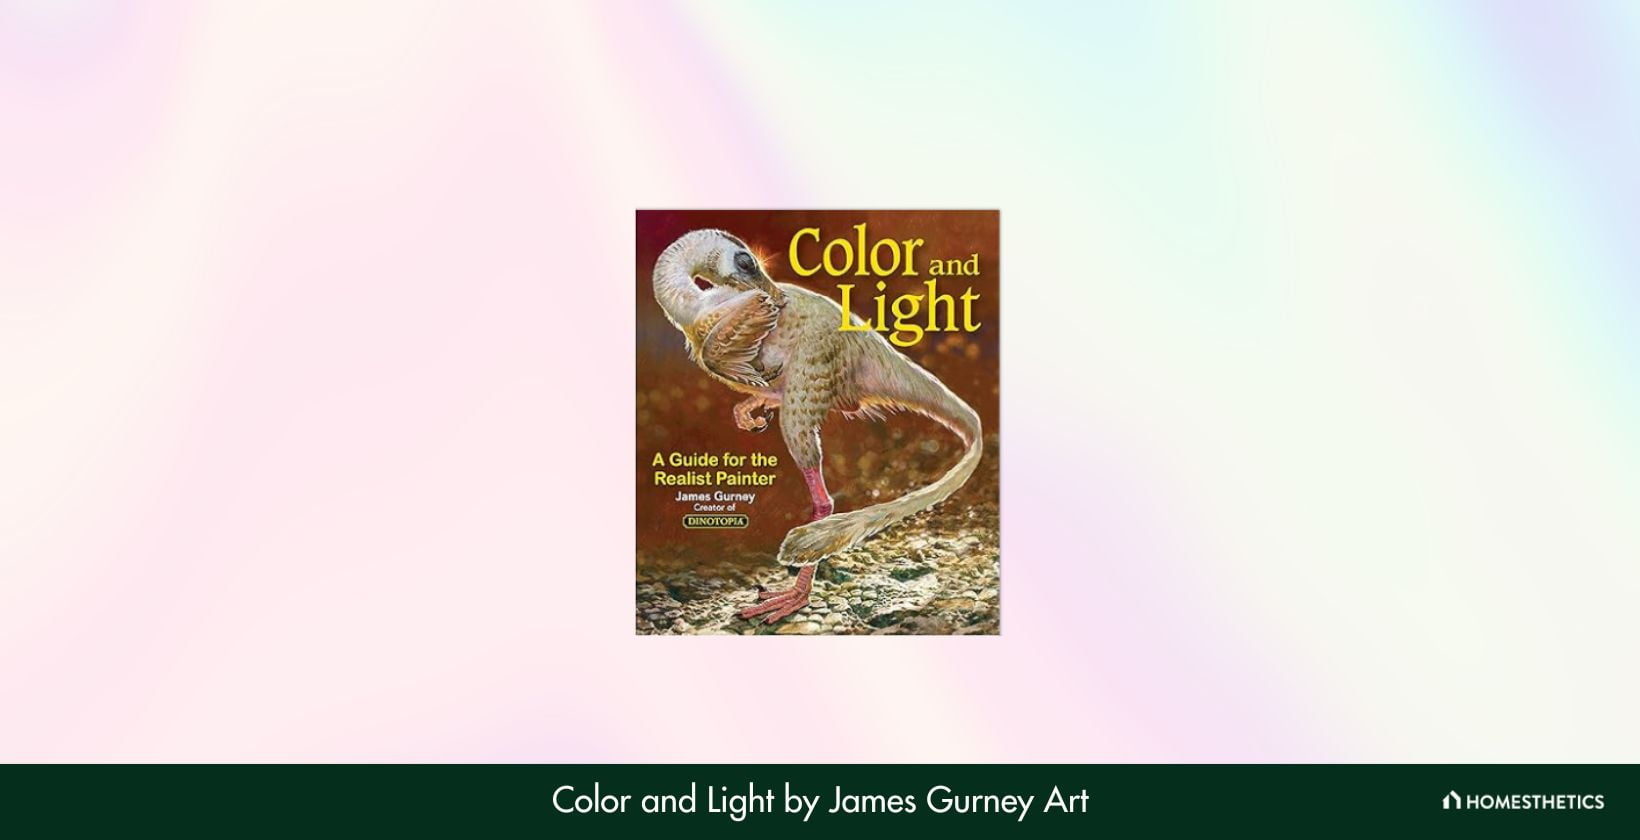 Color and Light by James Gurney Art